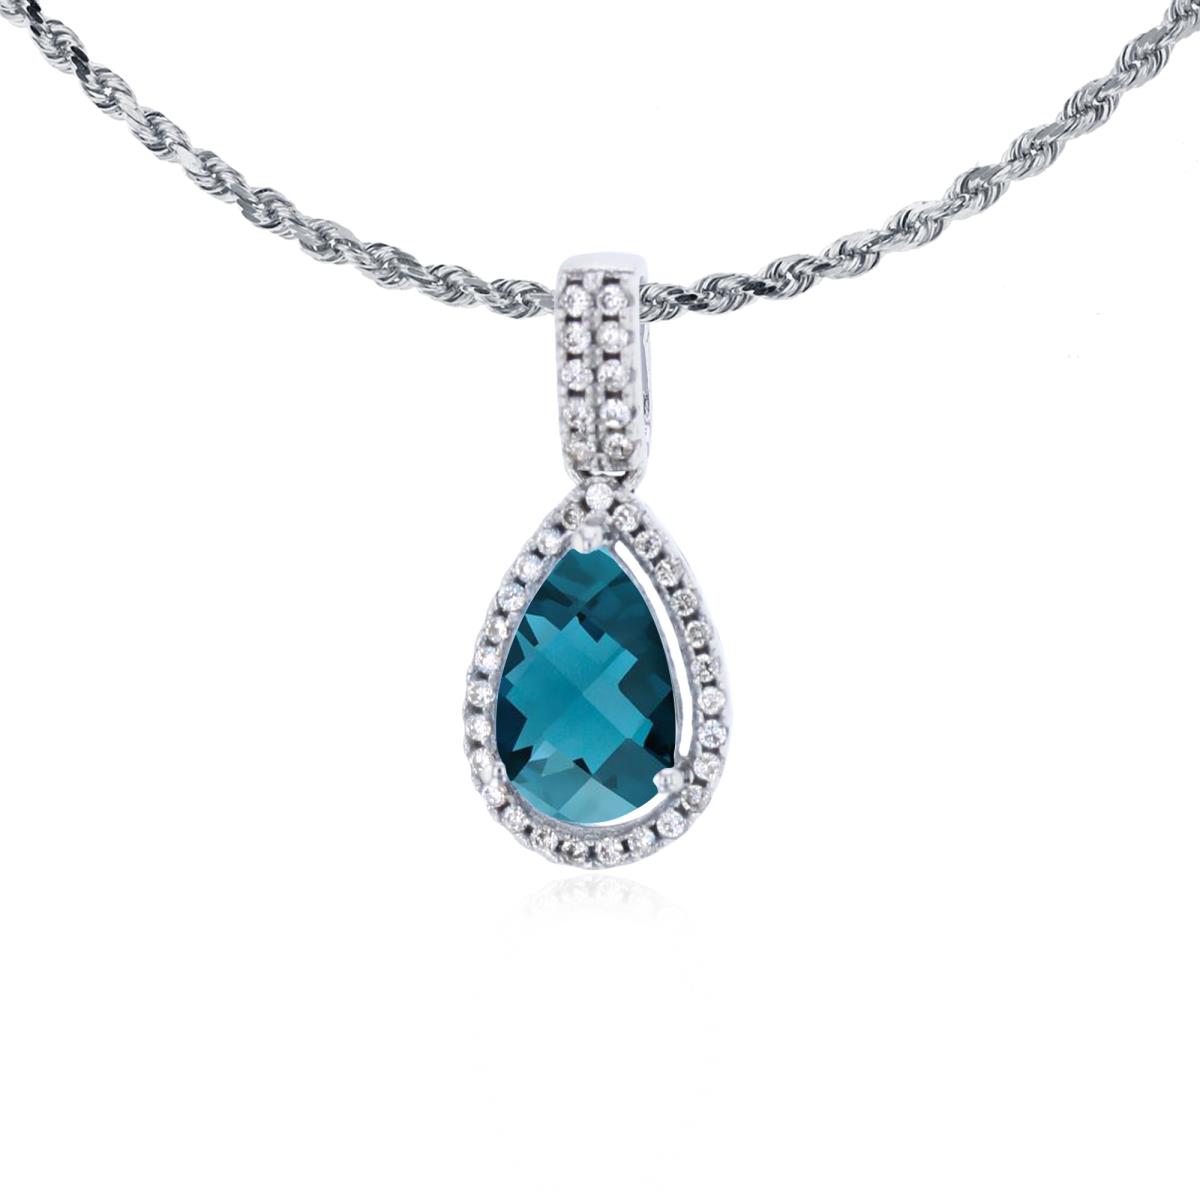 14K White Gold 8x5mm Pear Cut London Blue Topaz & 0.11 CTTW Diamond Halo 18" Rope Chain Necklace